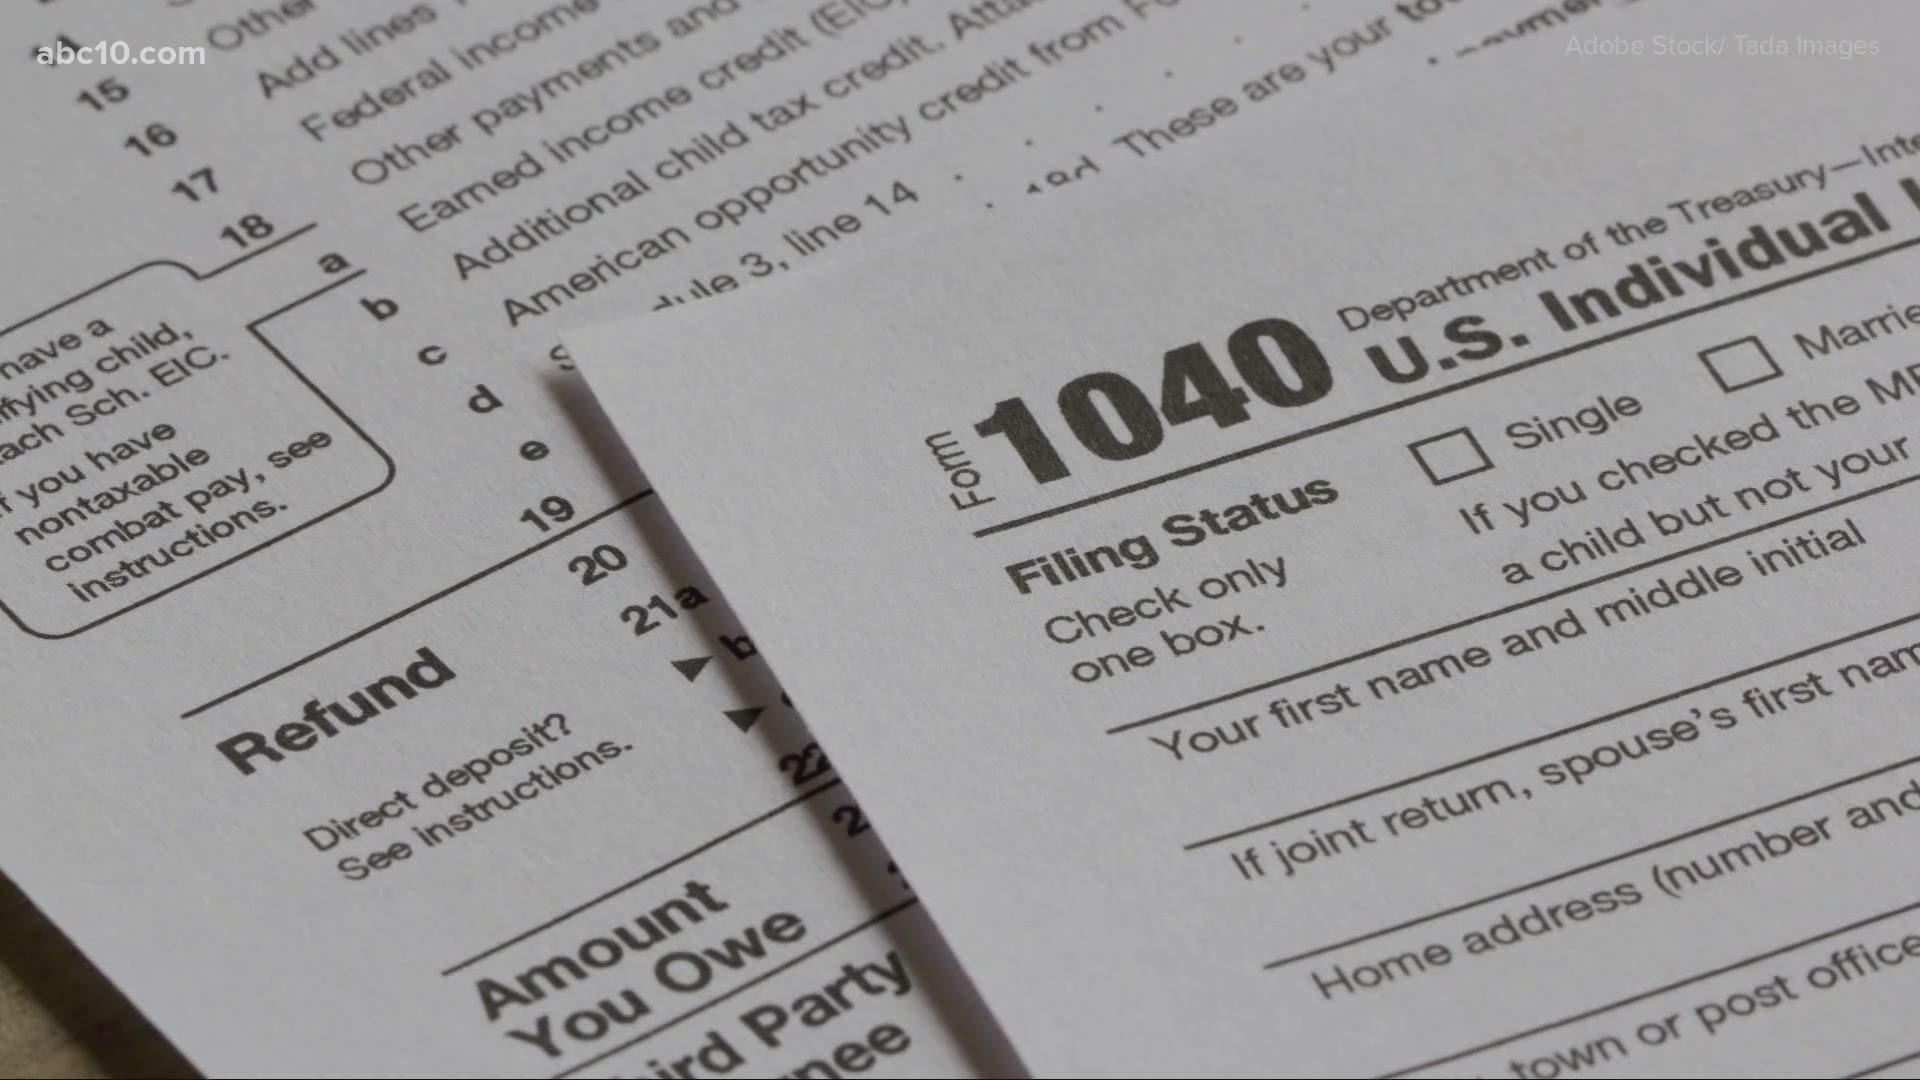 An employment rights attorney says the main thing you need is to make sure you file a tax return and have a mailing address to get the stimulus payment.